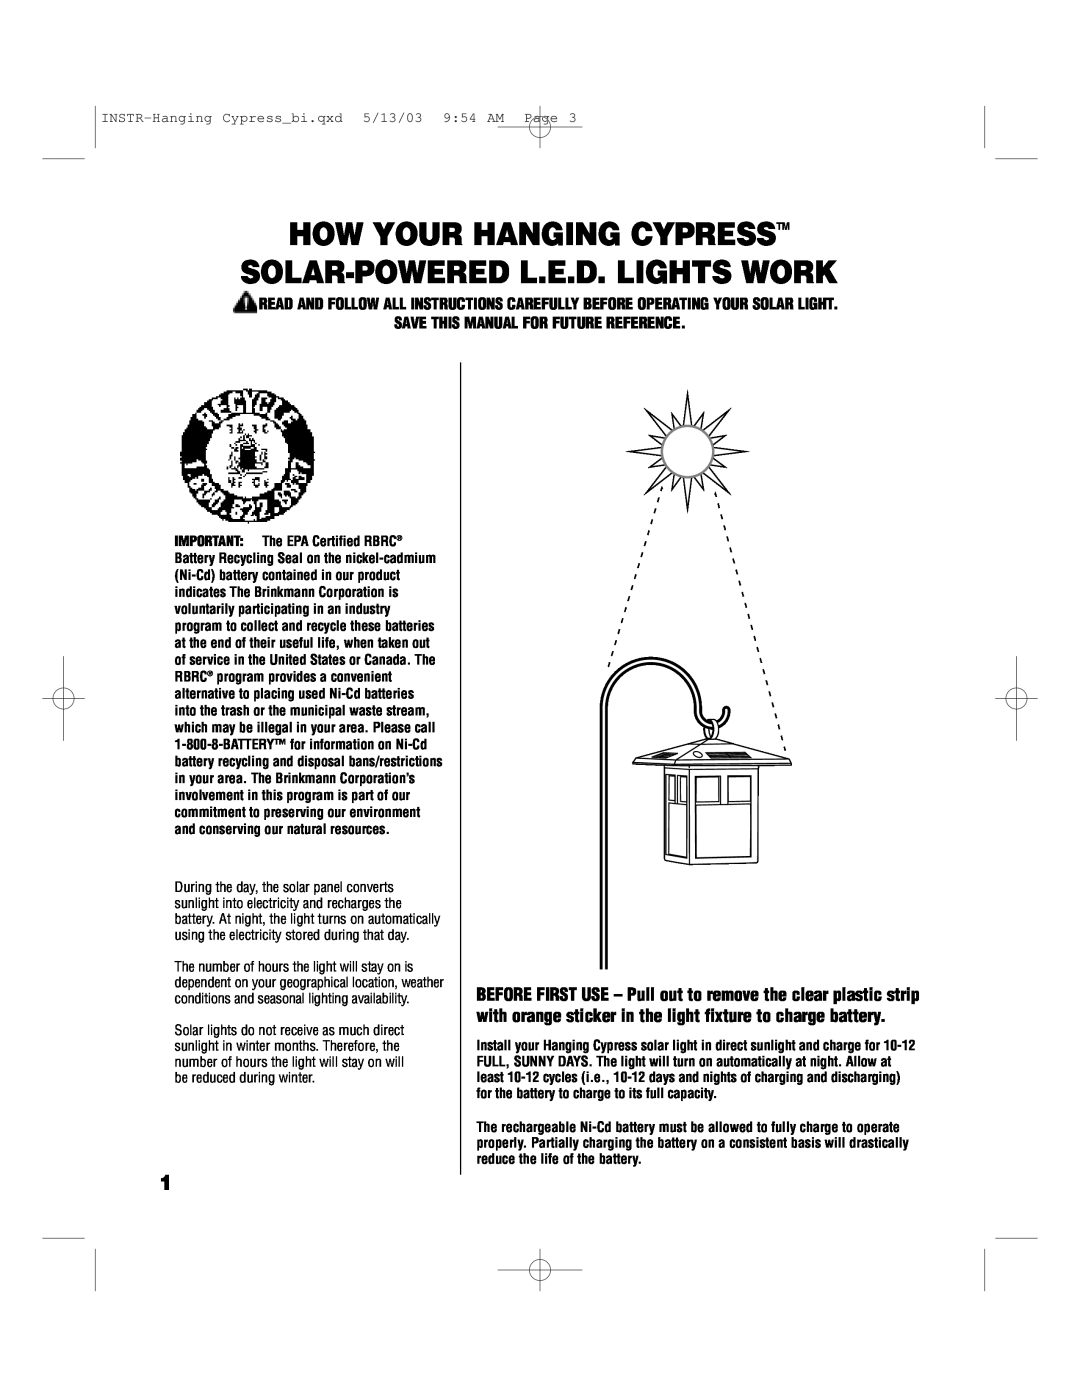 Brinkmann 822-1506-B How Your Hanging Cypresstm Solar-Powered L.E.D. Lights Work, Save This Manual For Future Reference 